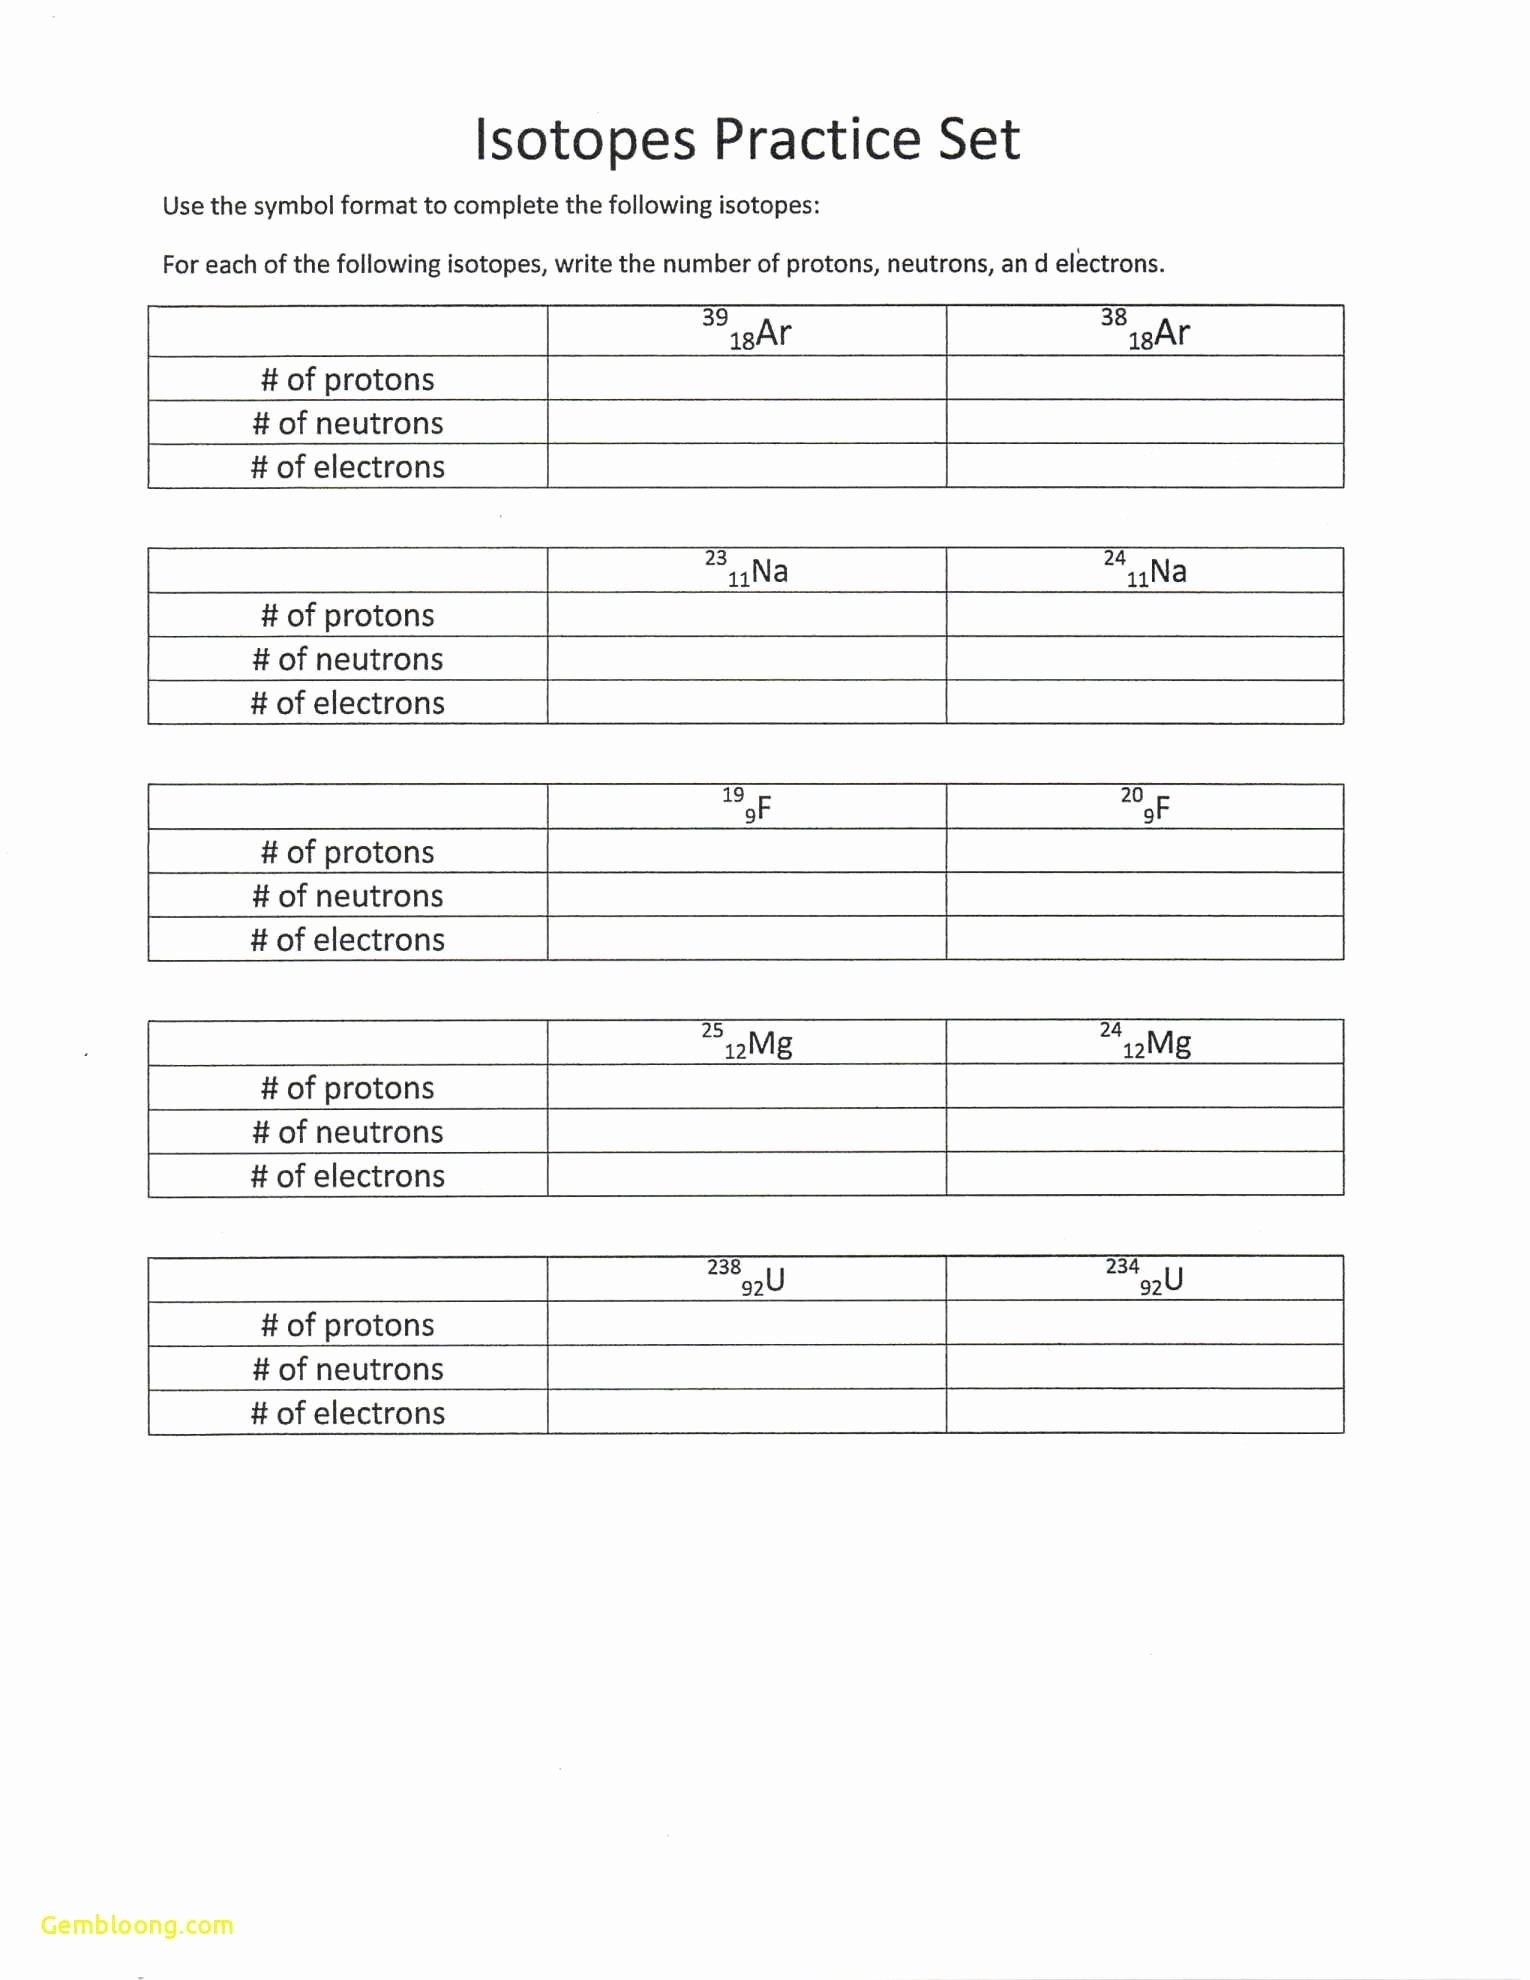 Molar Conversion Worksheet Answers Lovely Mole Conversion Practice Problems Worksheet with Answers